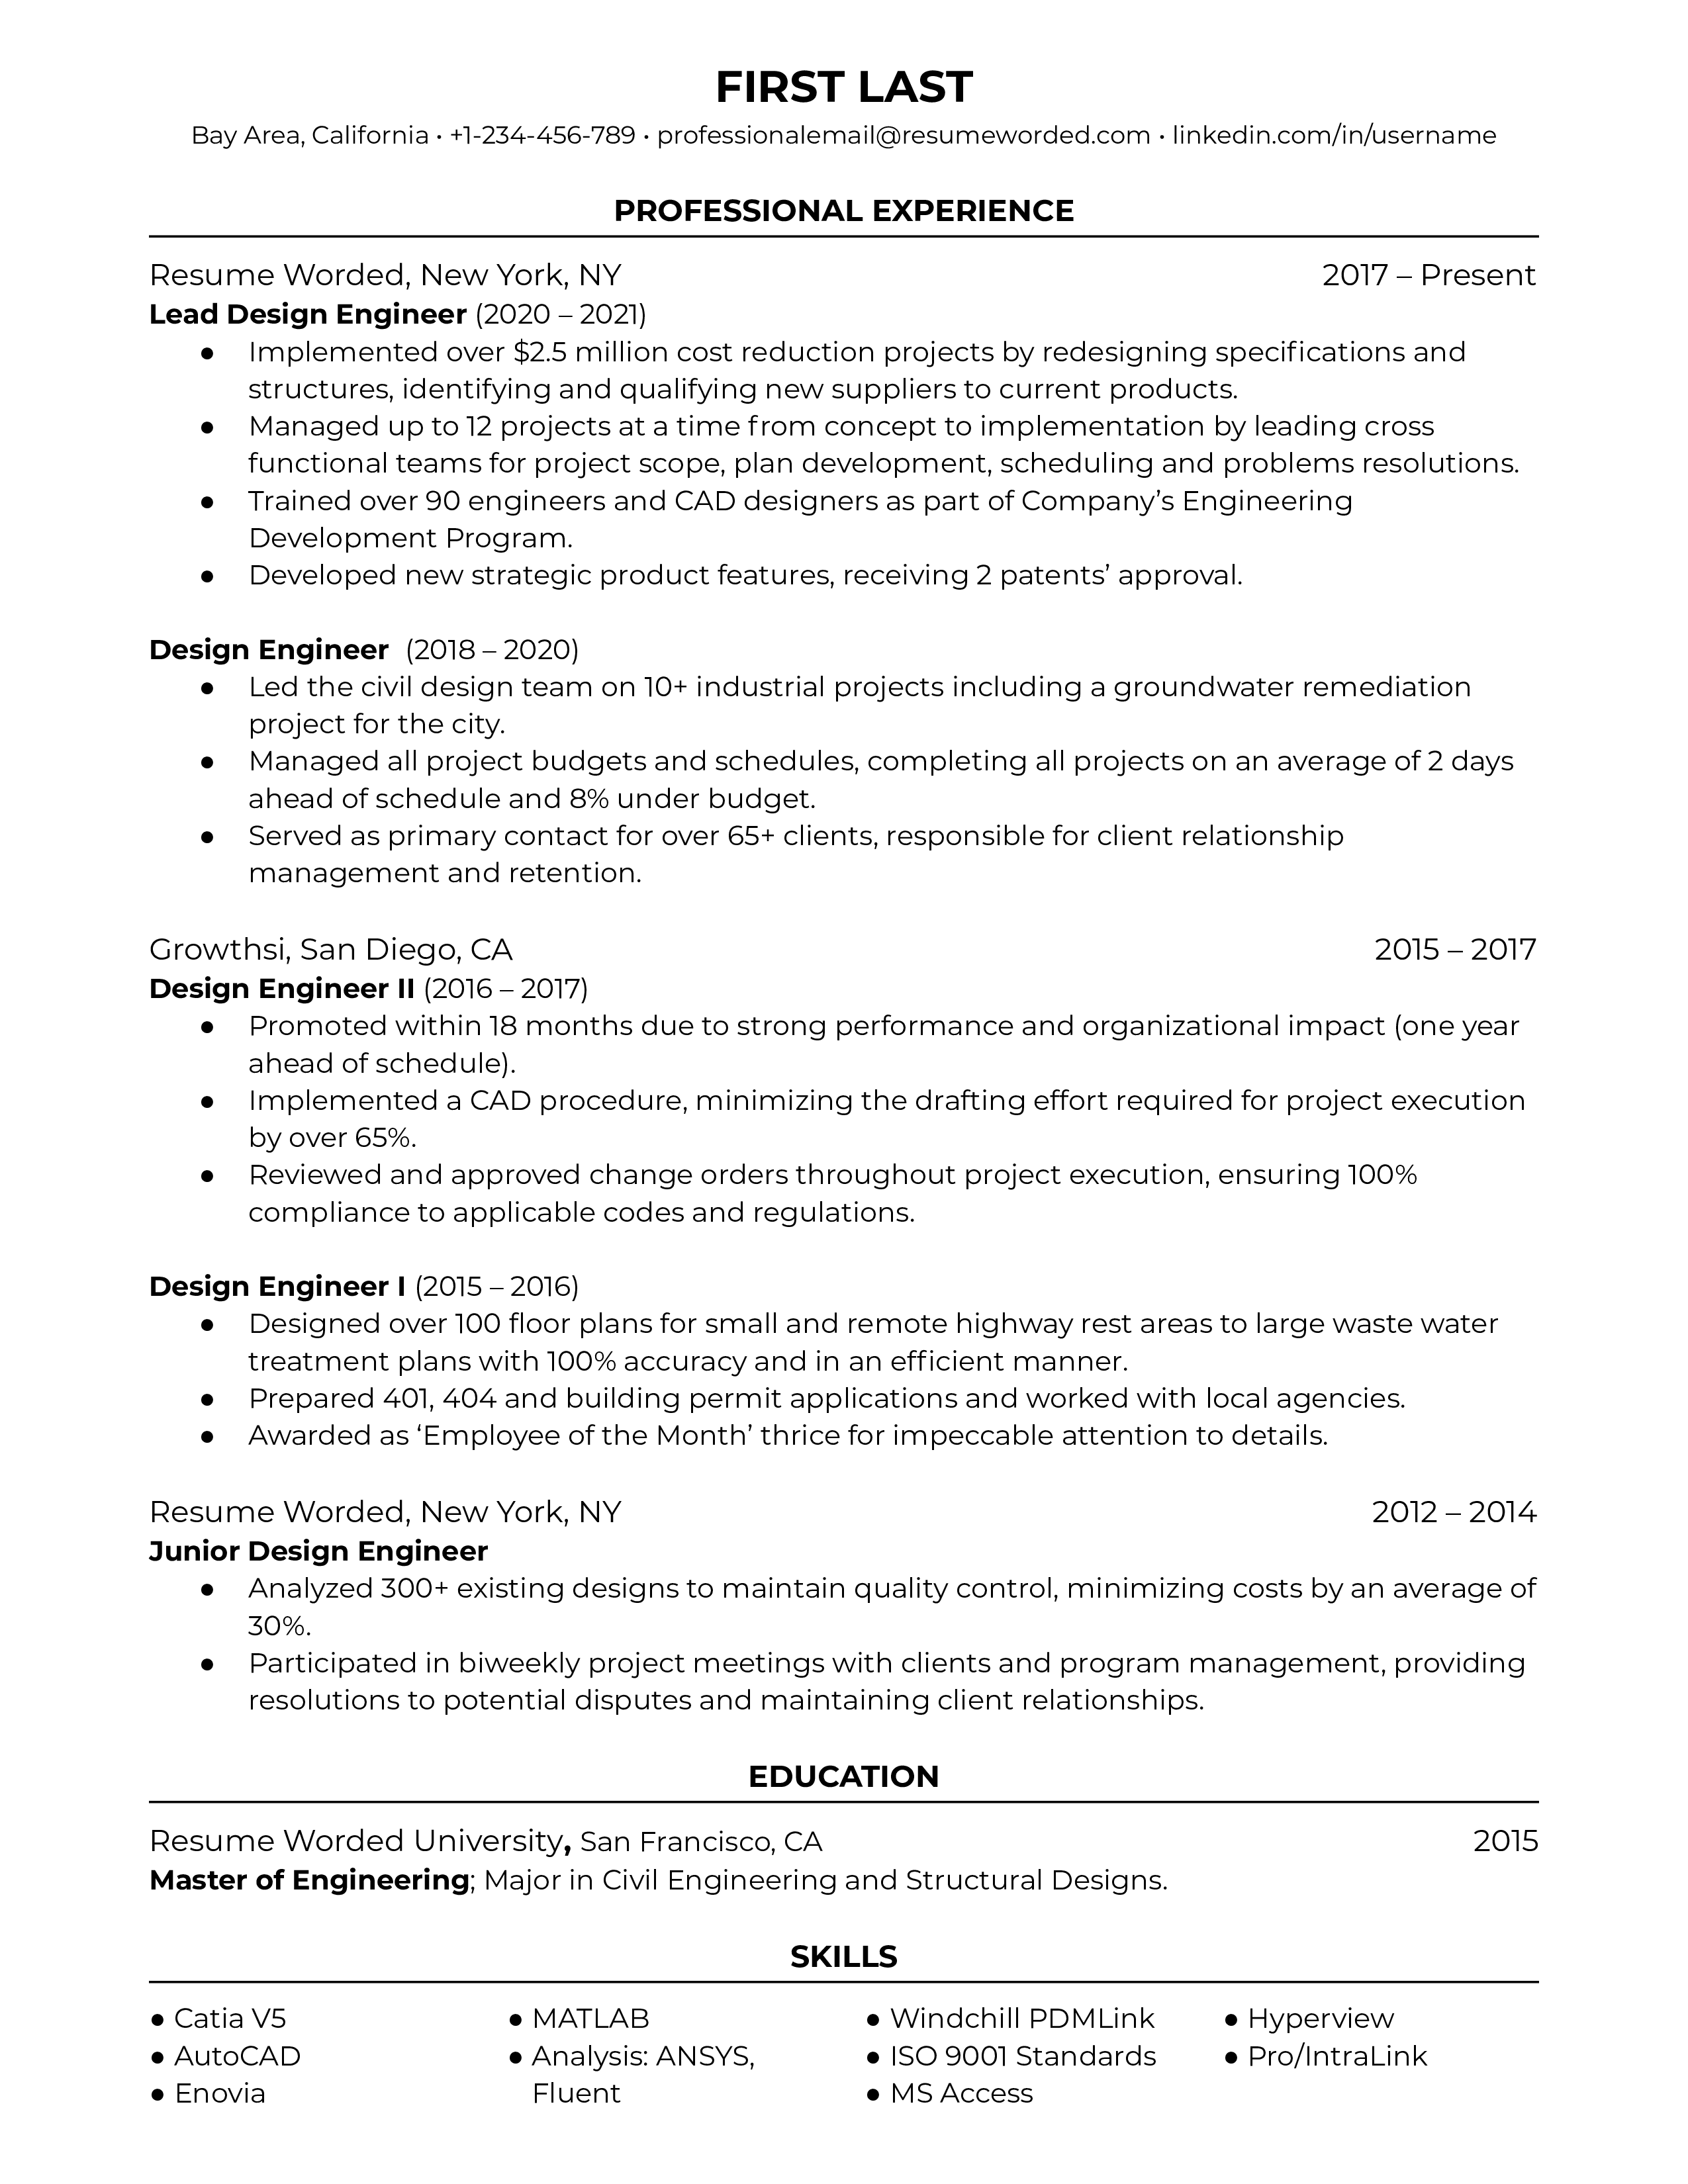 A resume for a design engineer with a degree in civil engineering and experience as a junior design engineer.